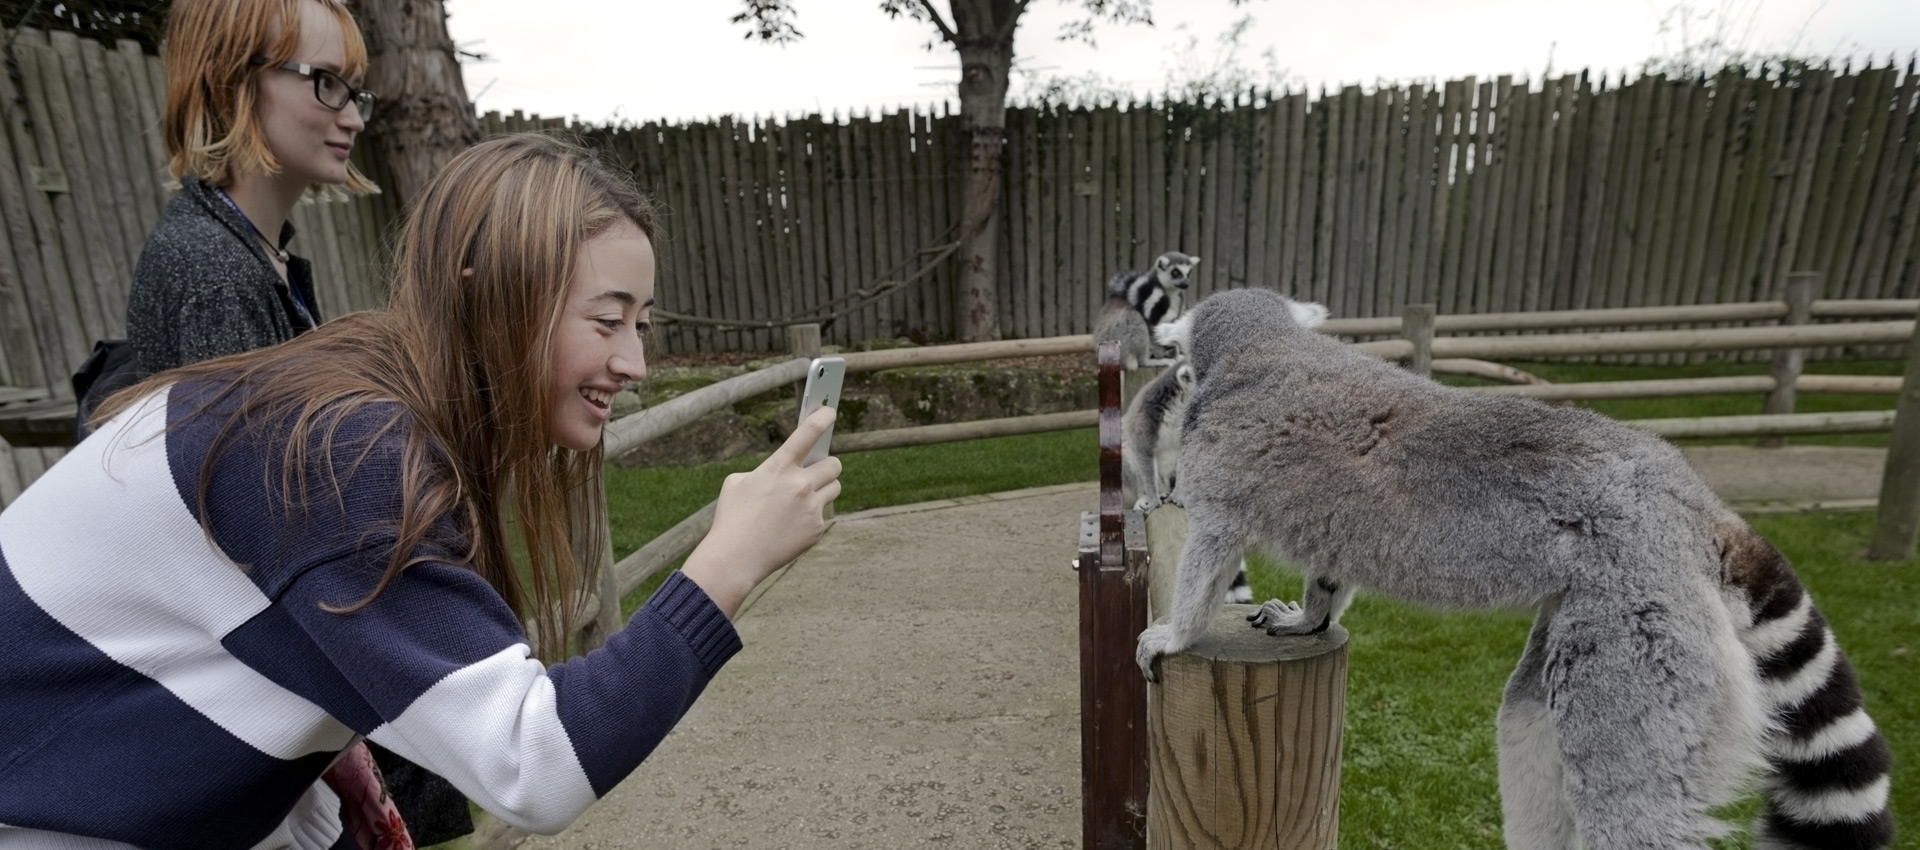 Students with a lemur at Drusilla's Zoo